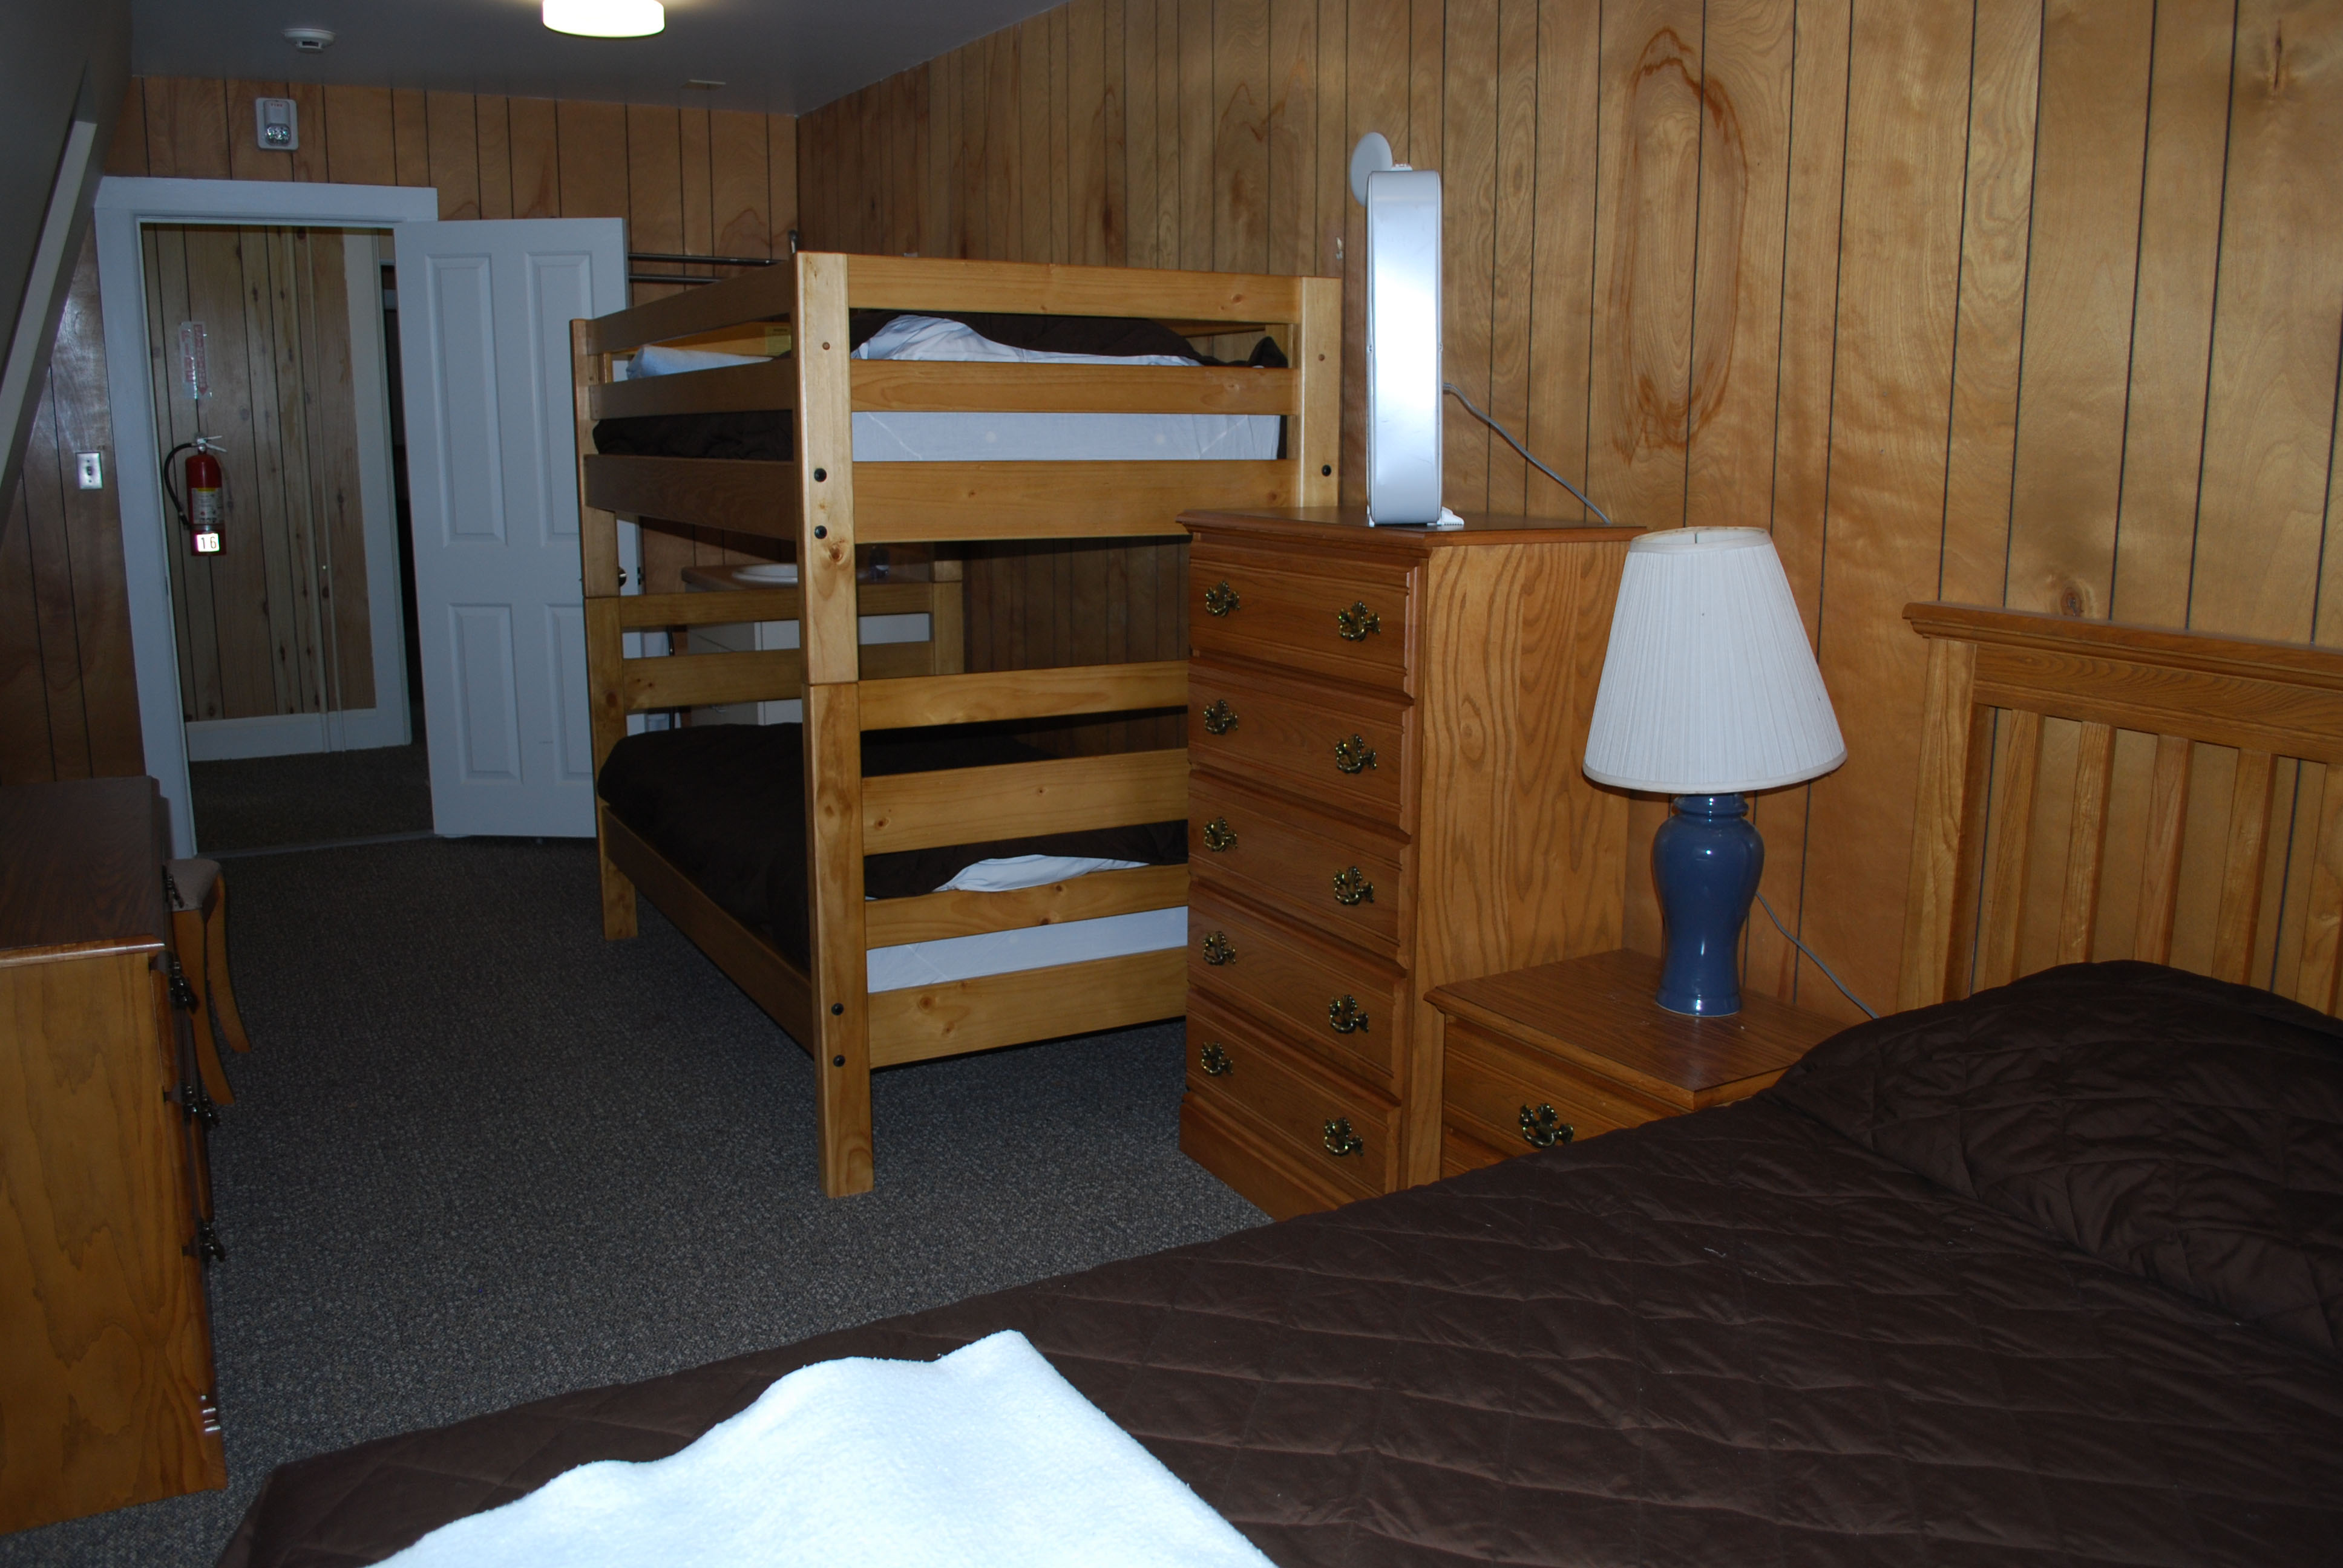 Inside of inn room with bunkbeds from another angle